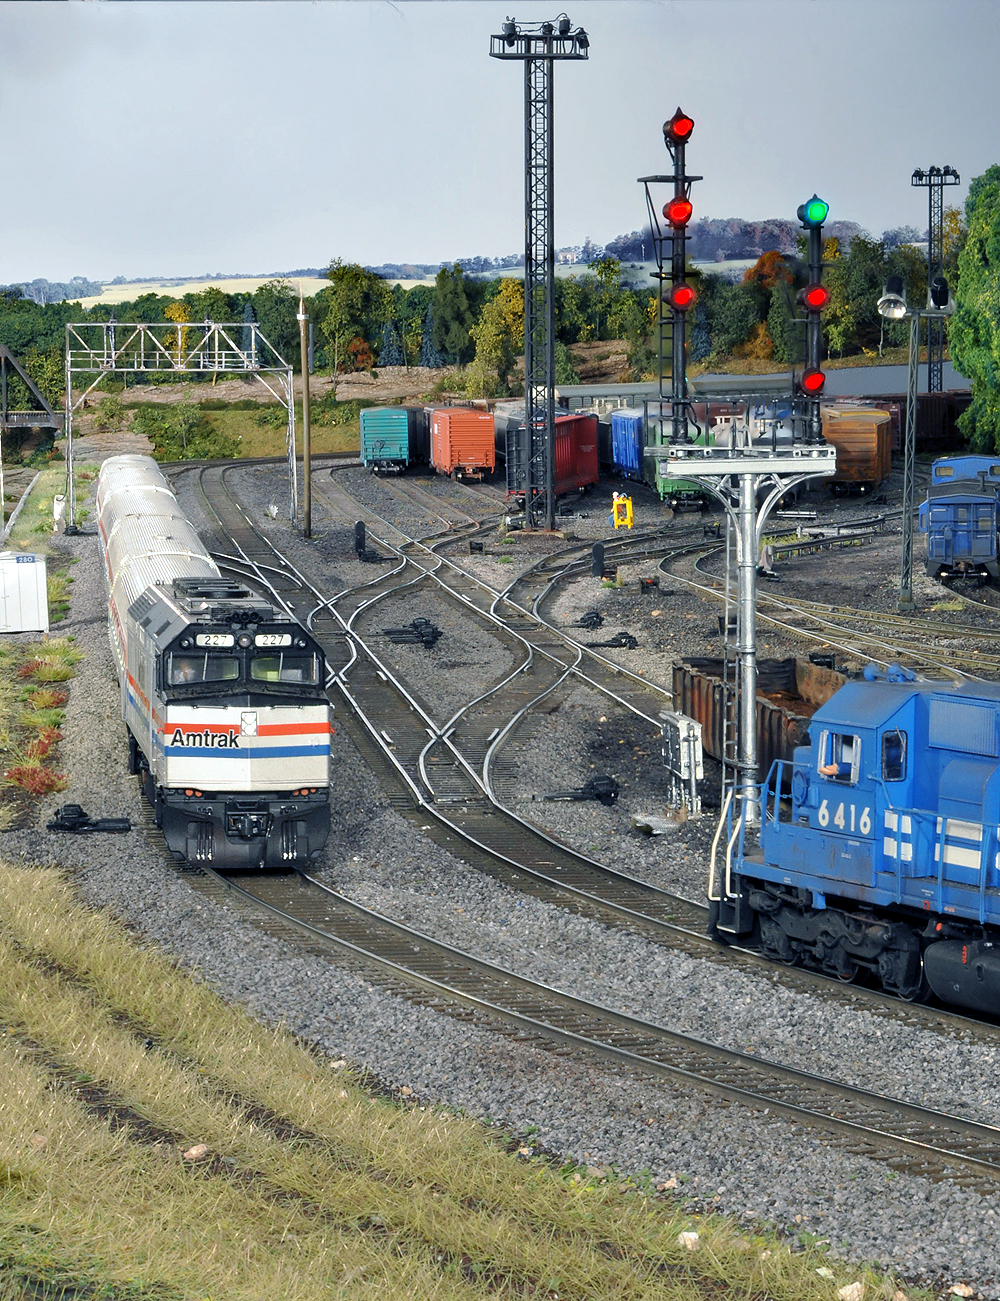 A silver Amtrak F40 meets a Conrail blue SD diesel as tracks branch off to the right into a rail yard.